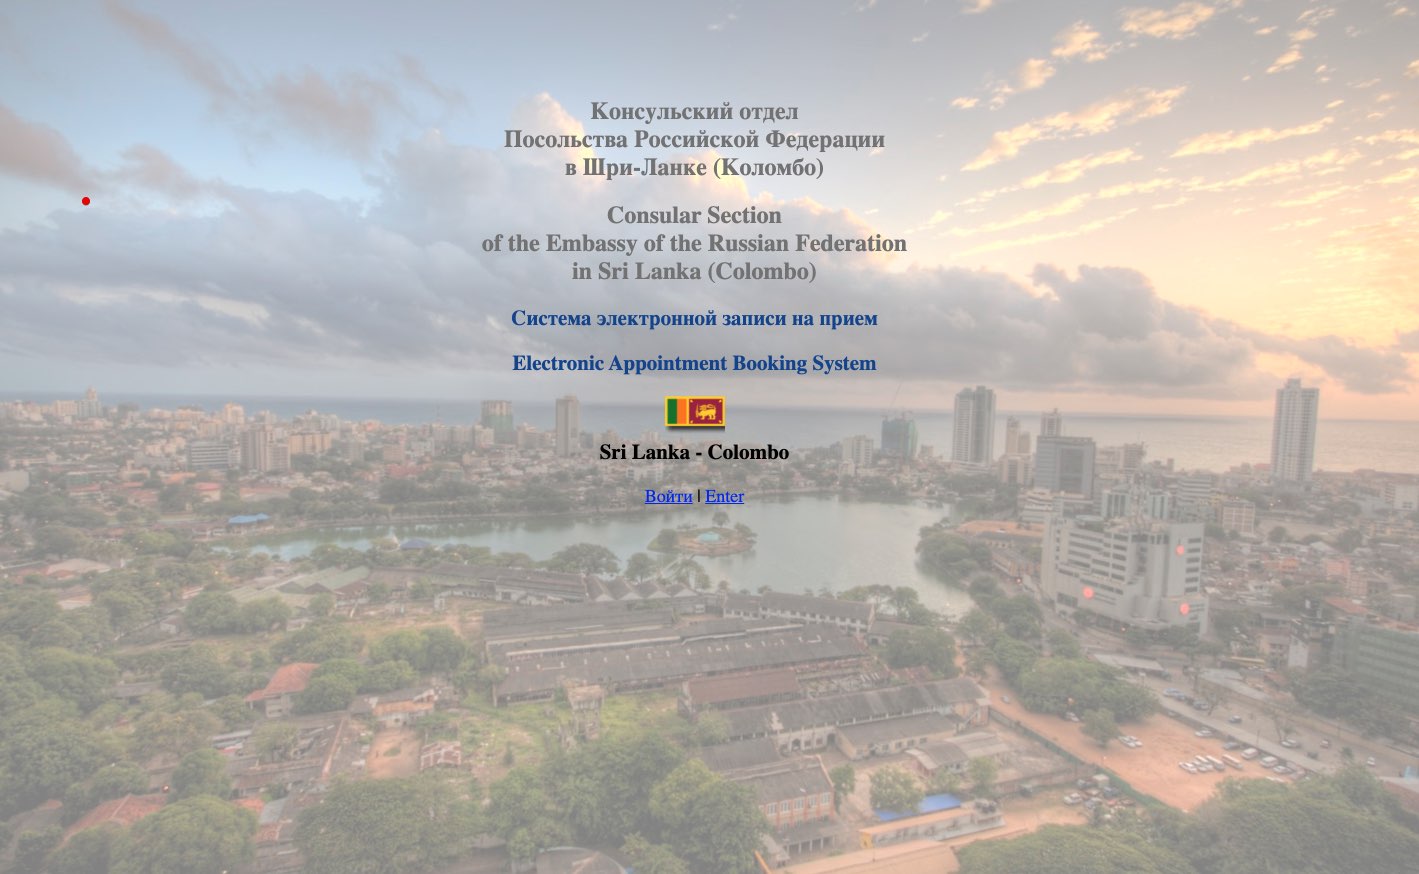 Consular Section of the Embassy of the Russian Federation in Sri Lanka - Colombo - appointment electronic system